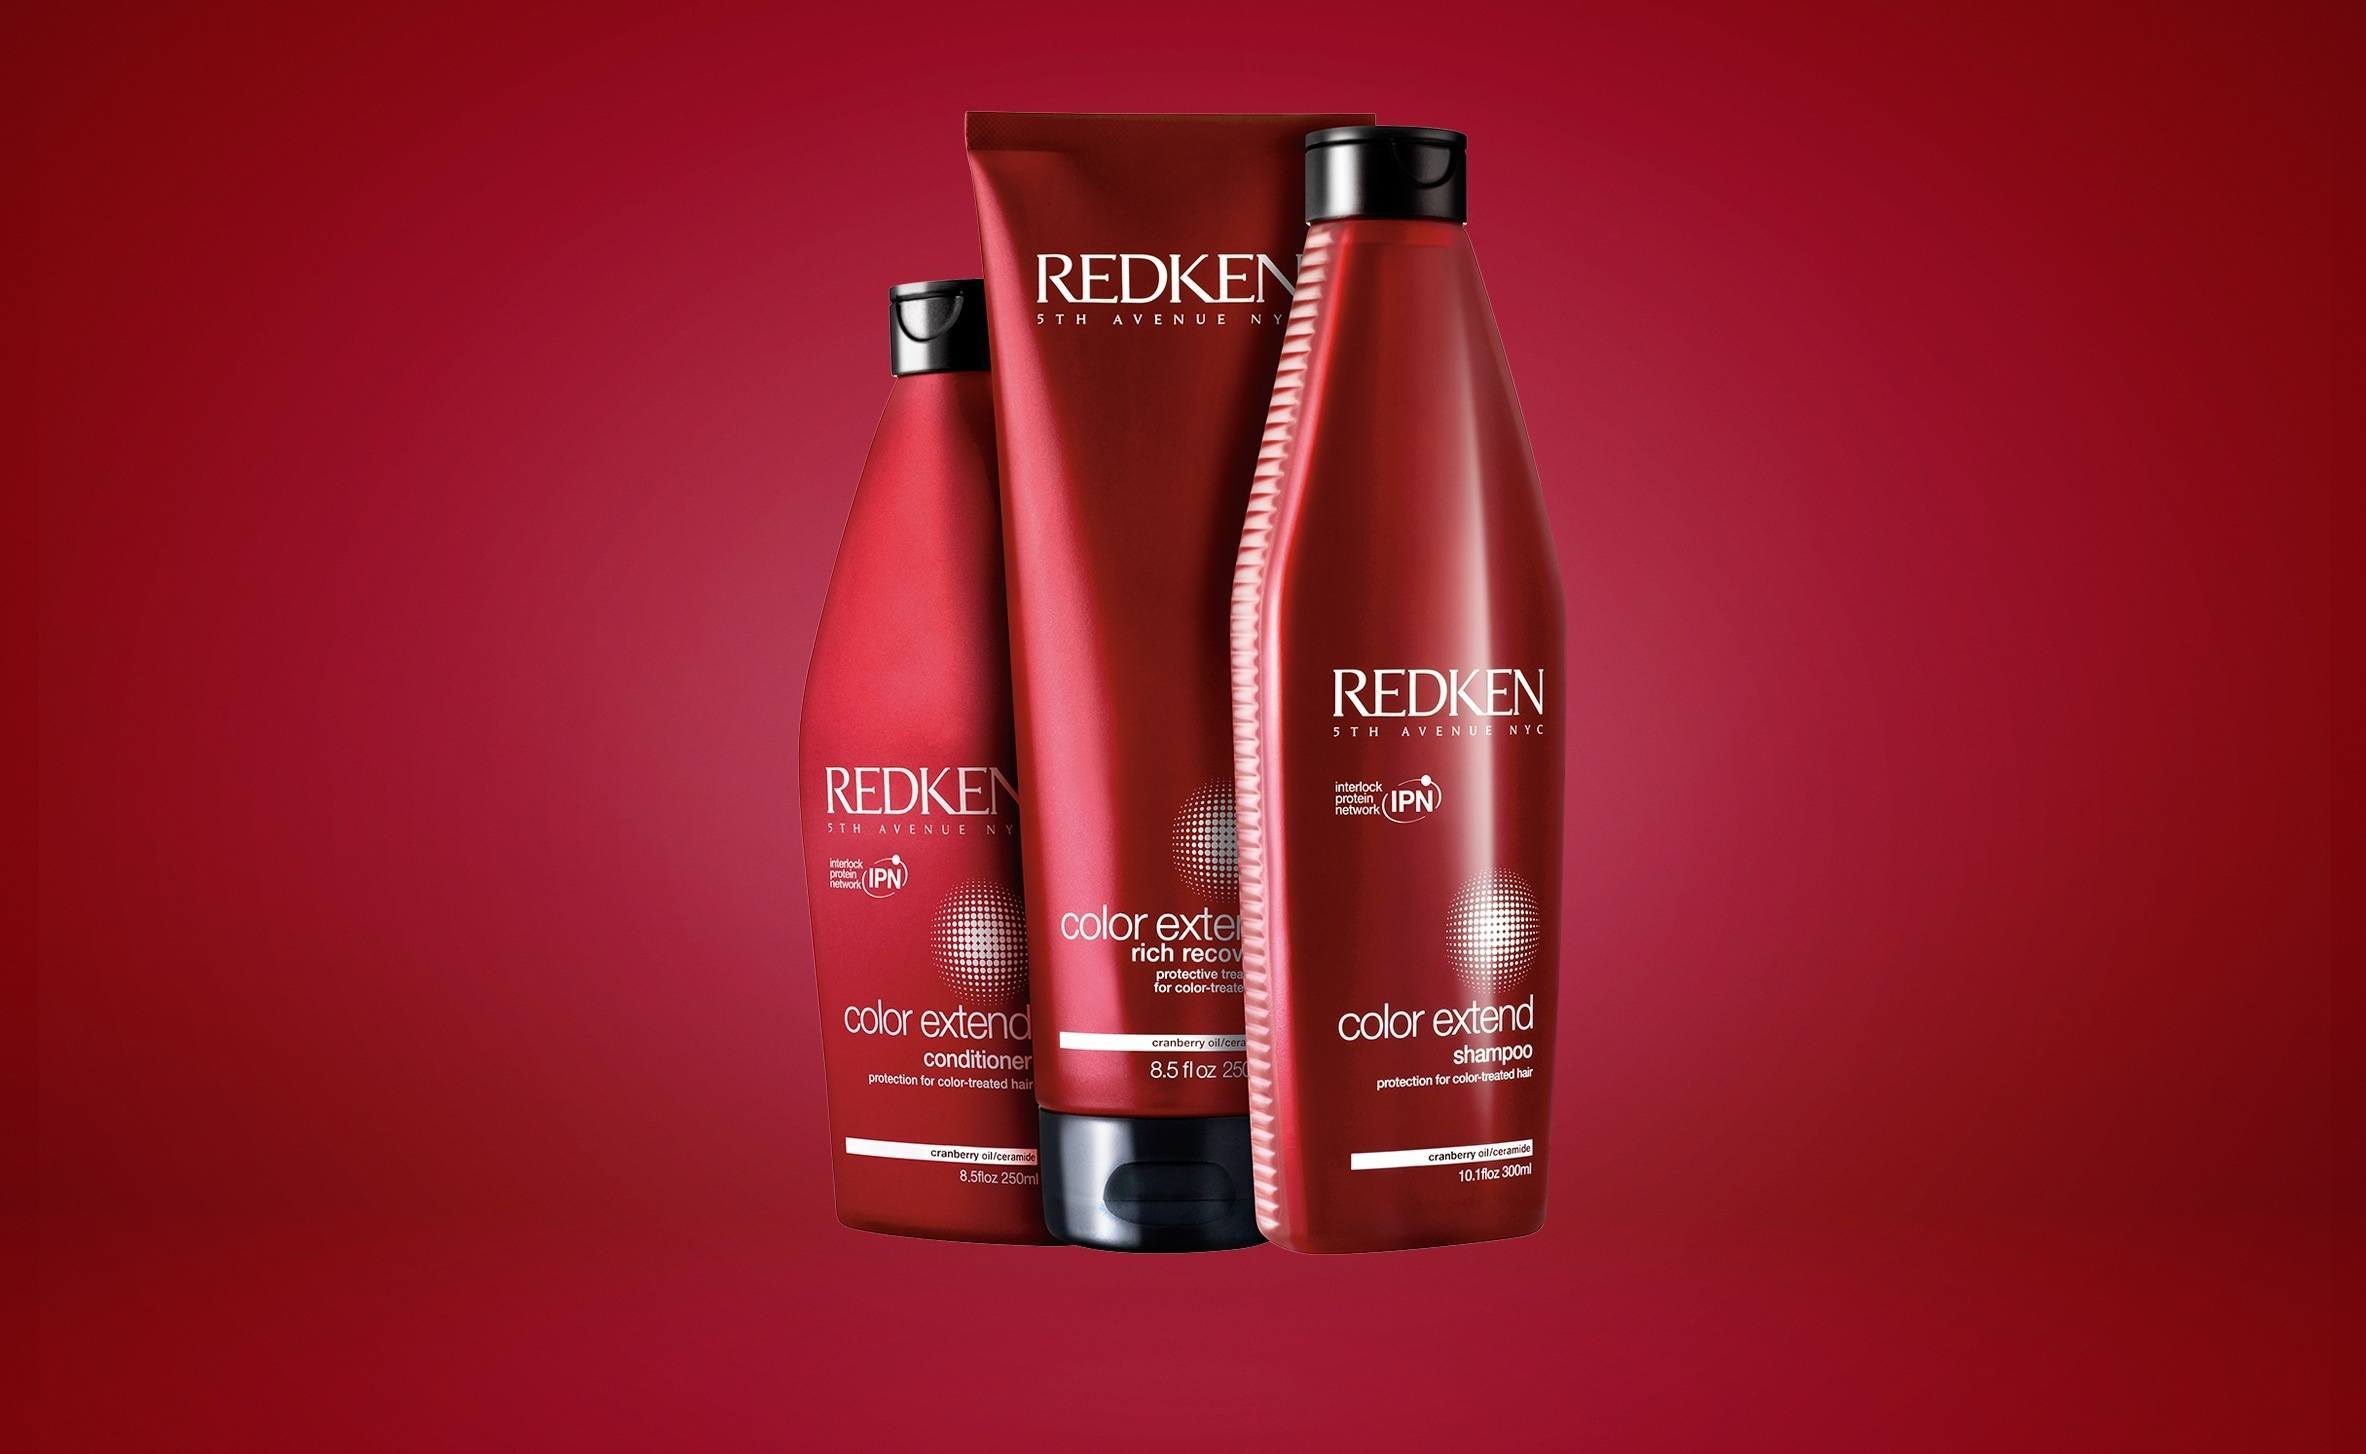 Redken Colour Extend shampoo and conditioner - available at Lounge Hair Boutique - Unisex hairdressers in Ashford, Kent